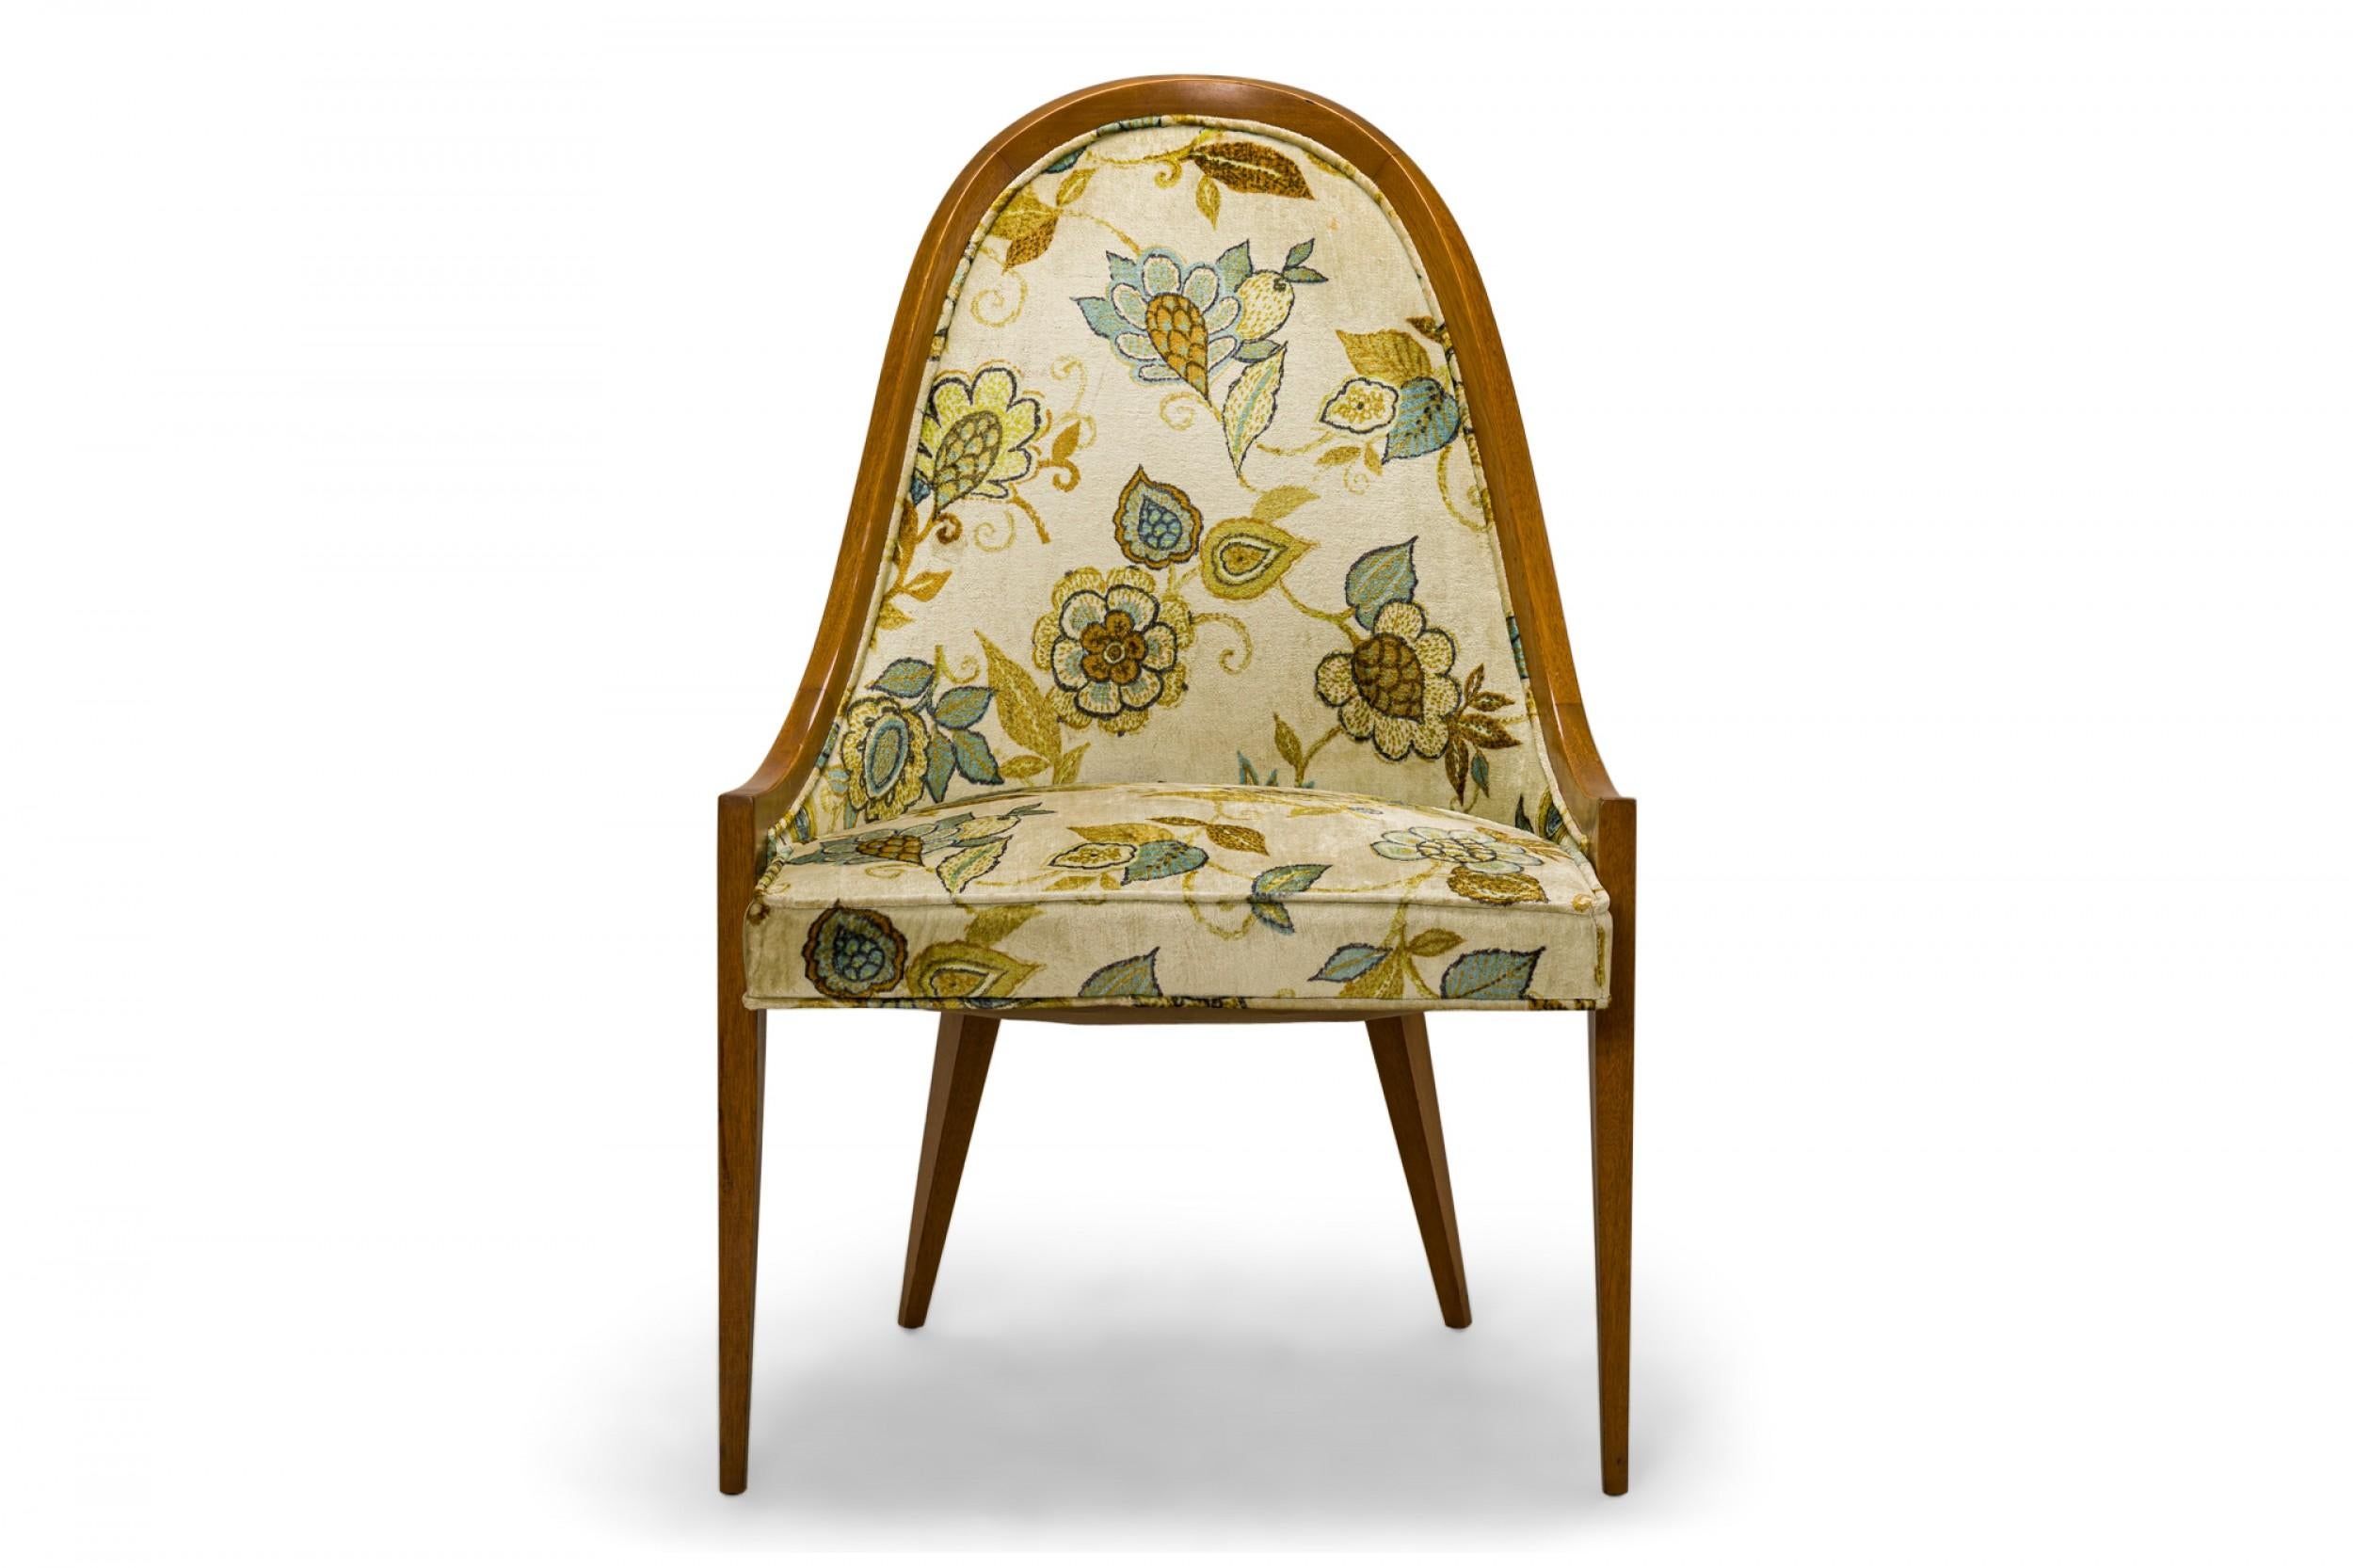 Pair of American mid-century 'Gondola' pull up / side chairs with curved light mahogany frames and beige, brown, green, and blue floral print fabric upholstered seat backs and cushions, resting on four tapered mahogany dowel legs. (HARVEY